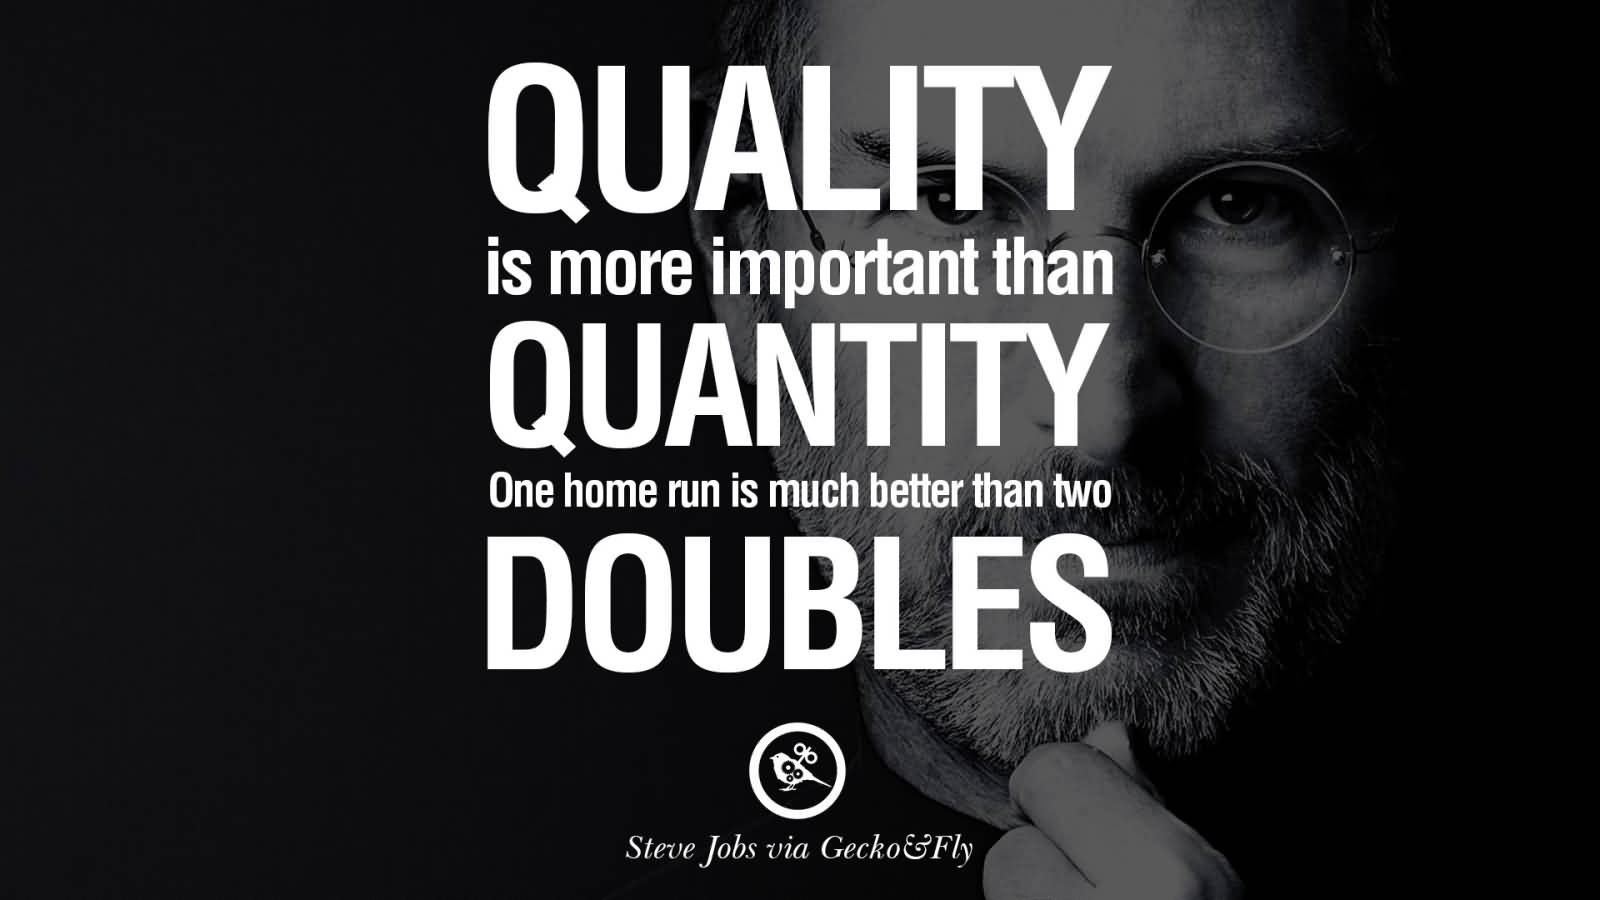 Quality is more important than quantity one home run is much better than two doubles. Steve Jobs